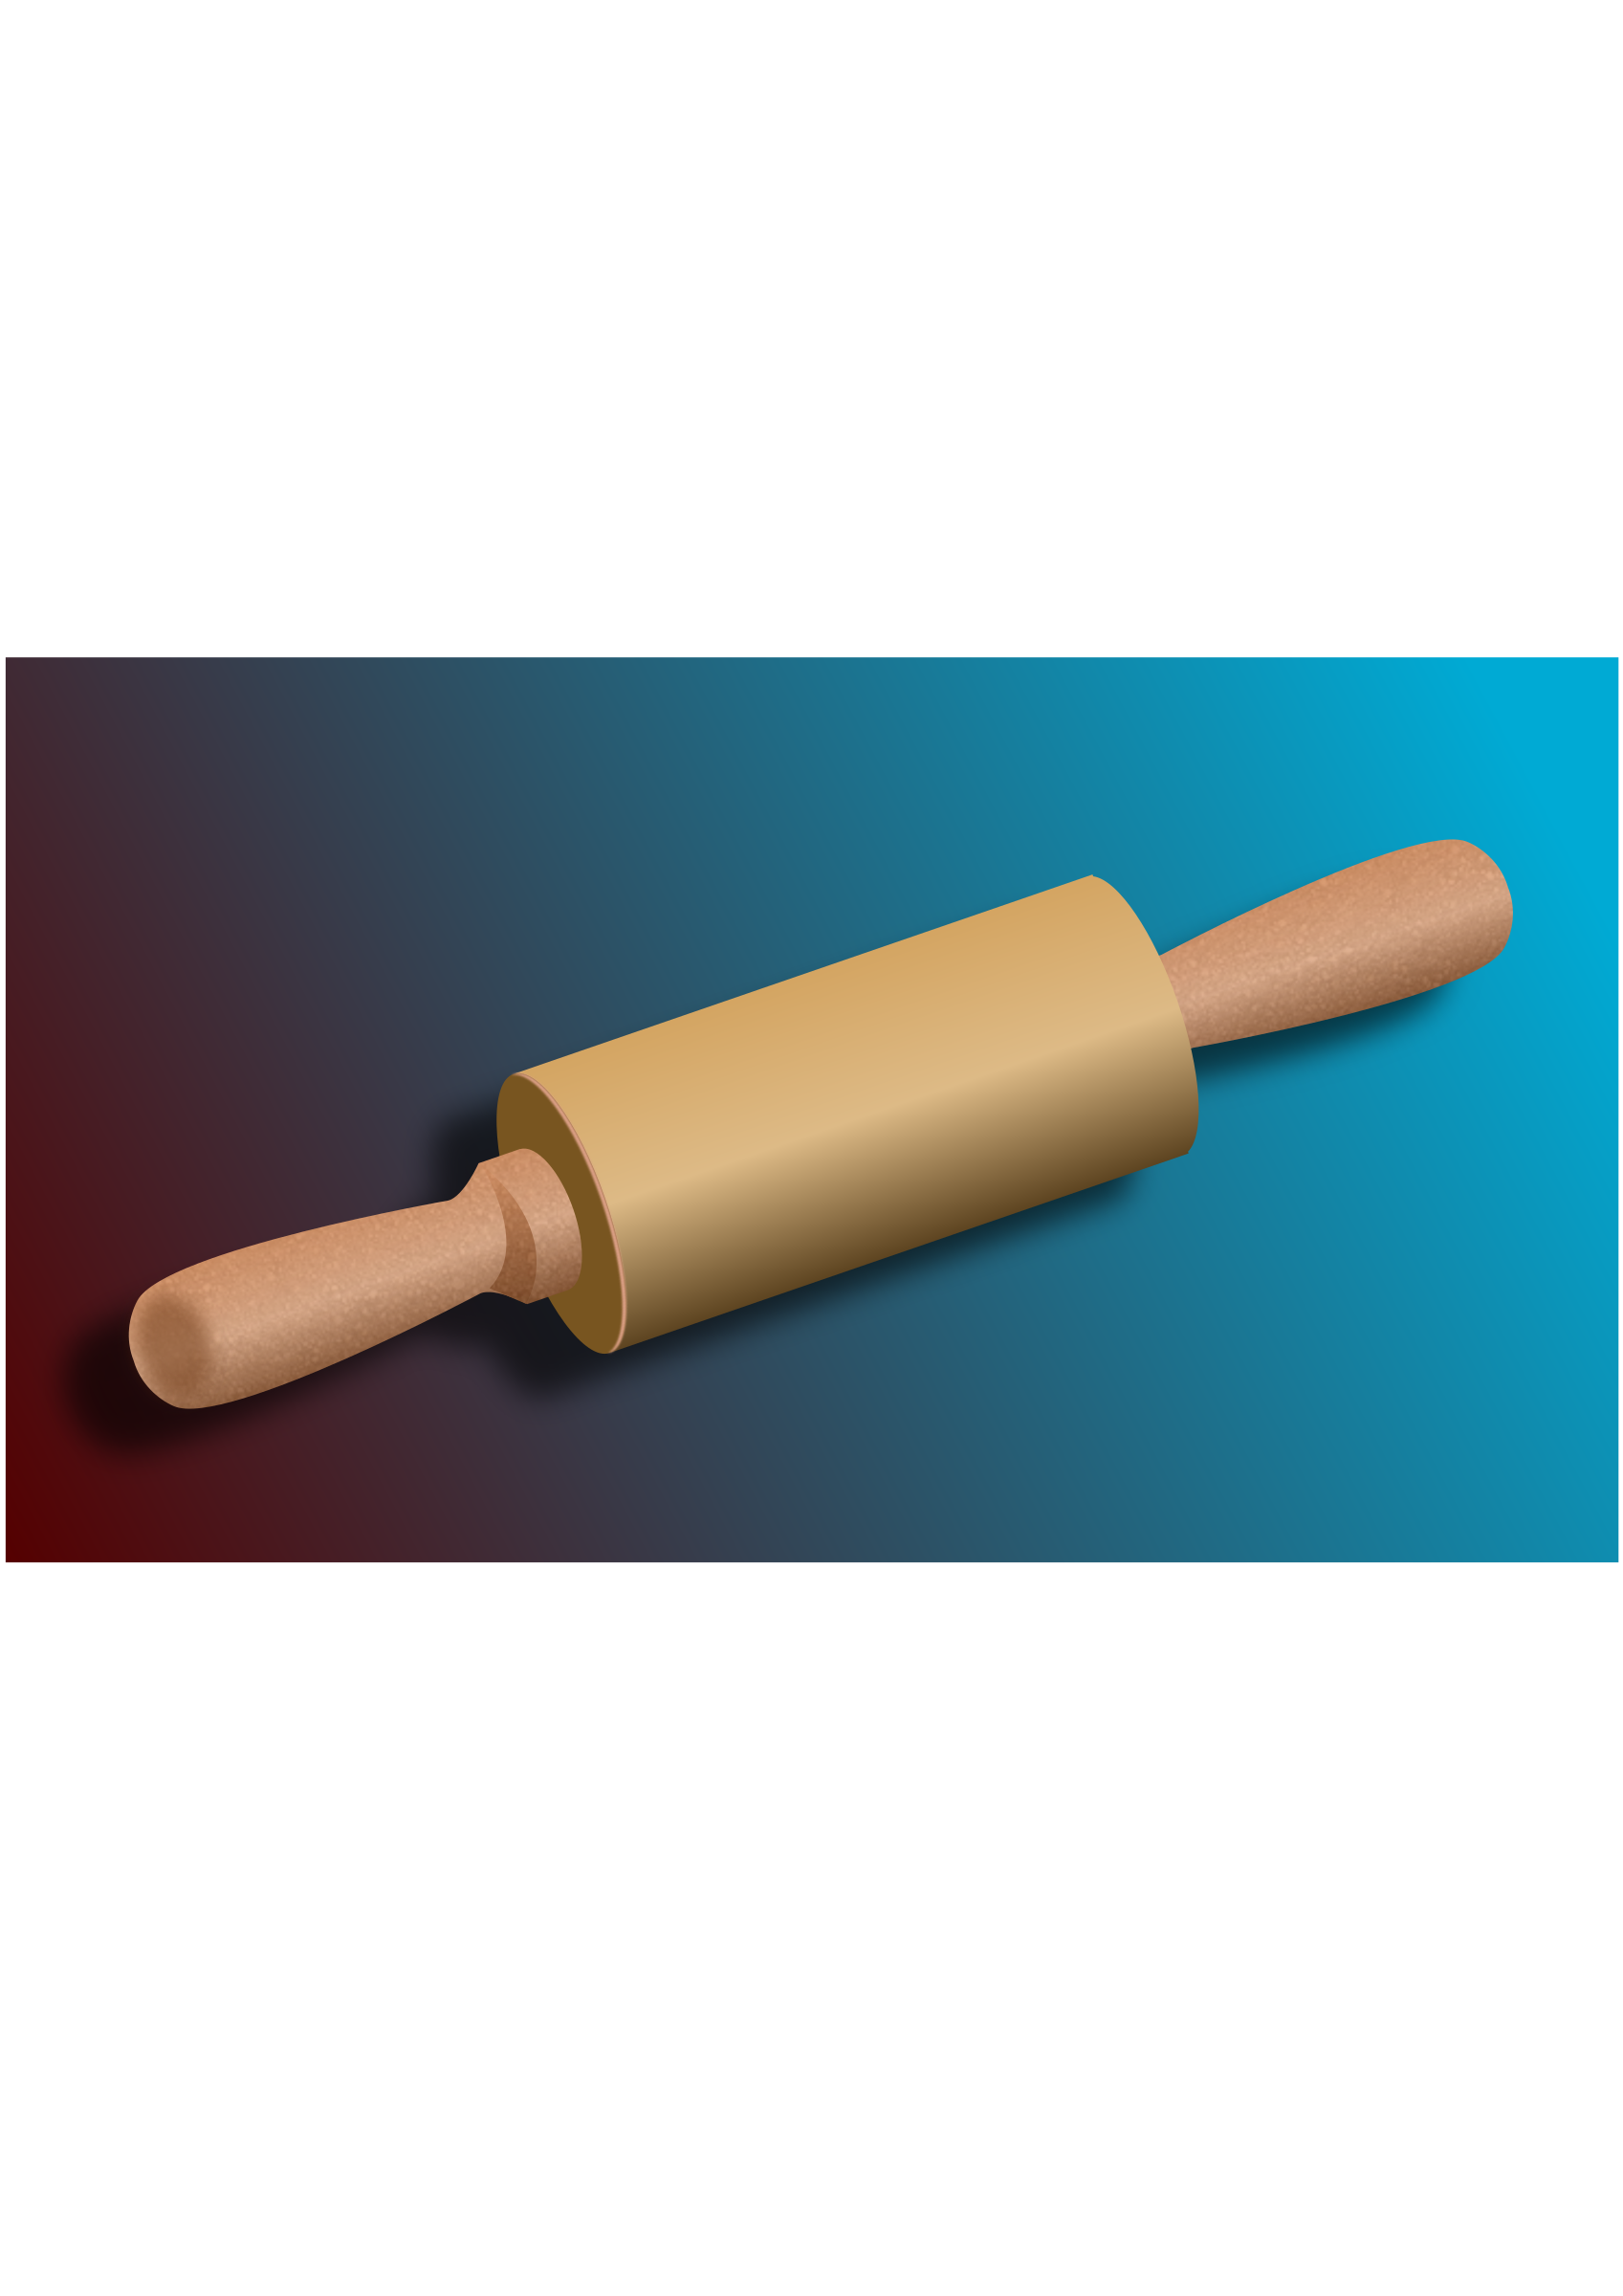 clipart kitchen rolling pin